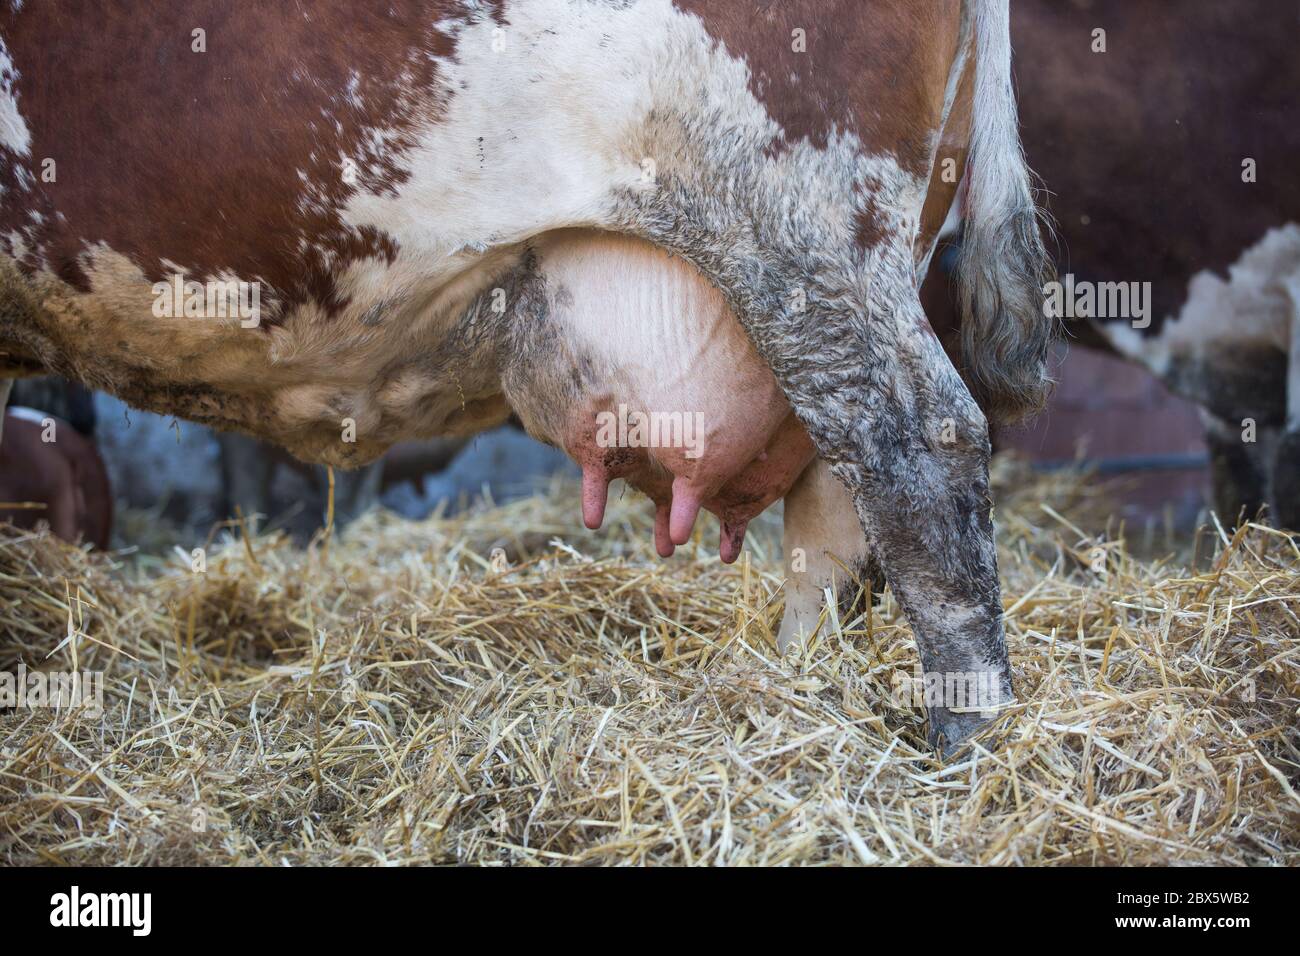 Cow udder full of milk, ready for milking, agriculture concept Stock Photo